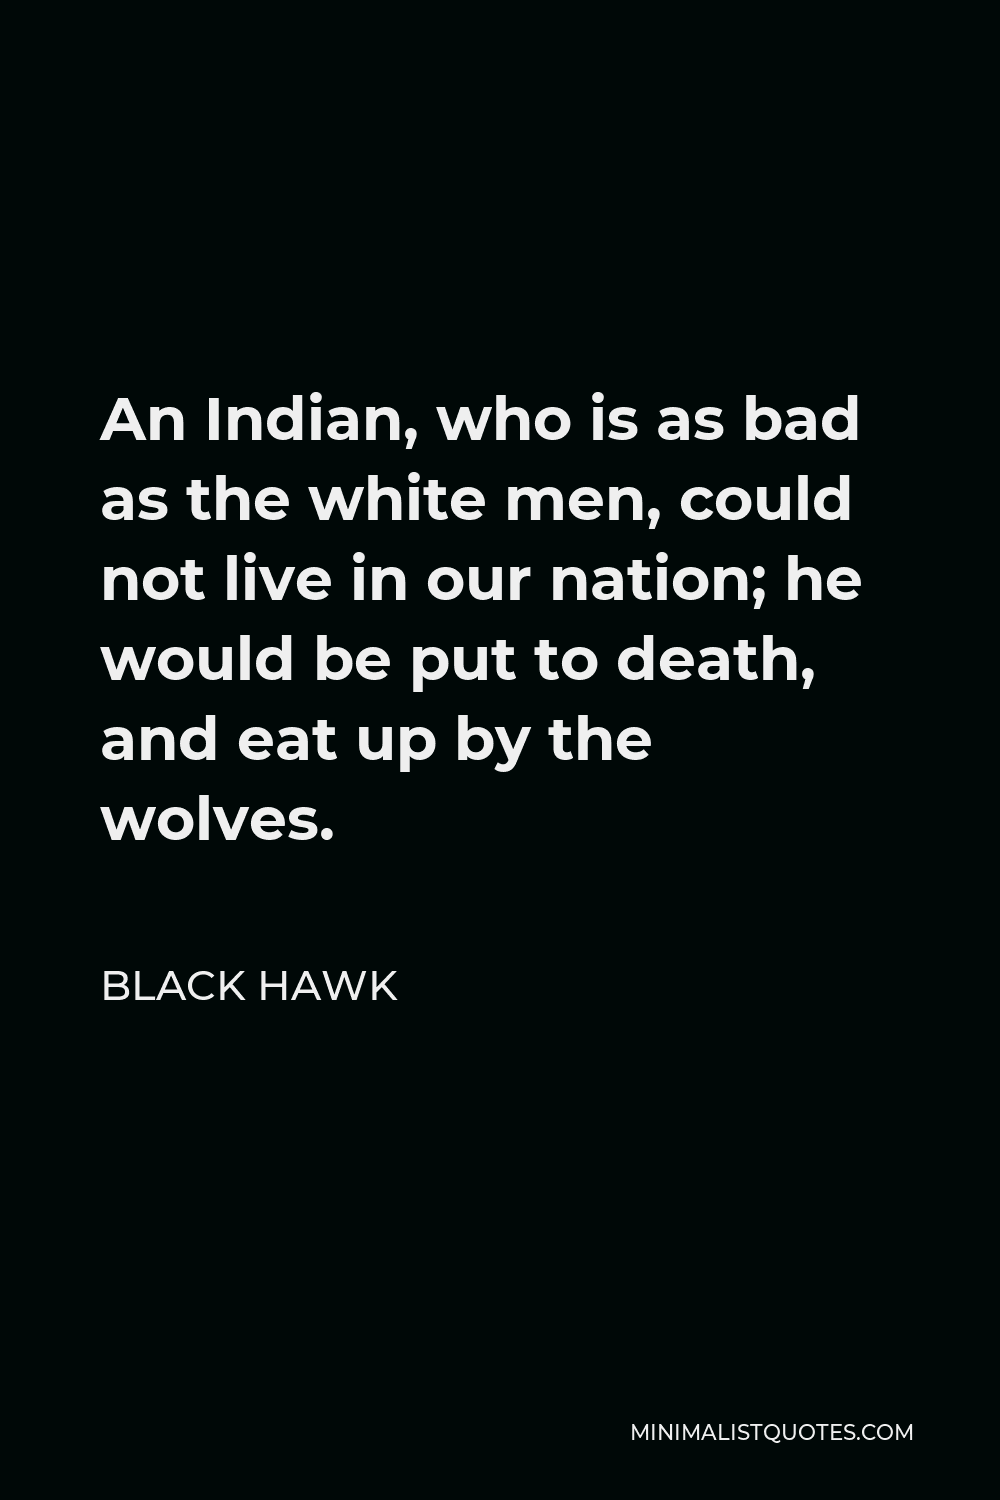 Black Hawk Quote - An Indian, who is as bad as the white men, could not live in our nation; he would be put to death, and eat up by the wolves.